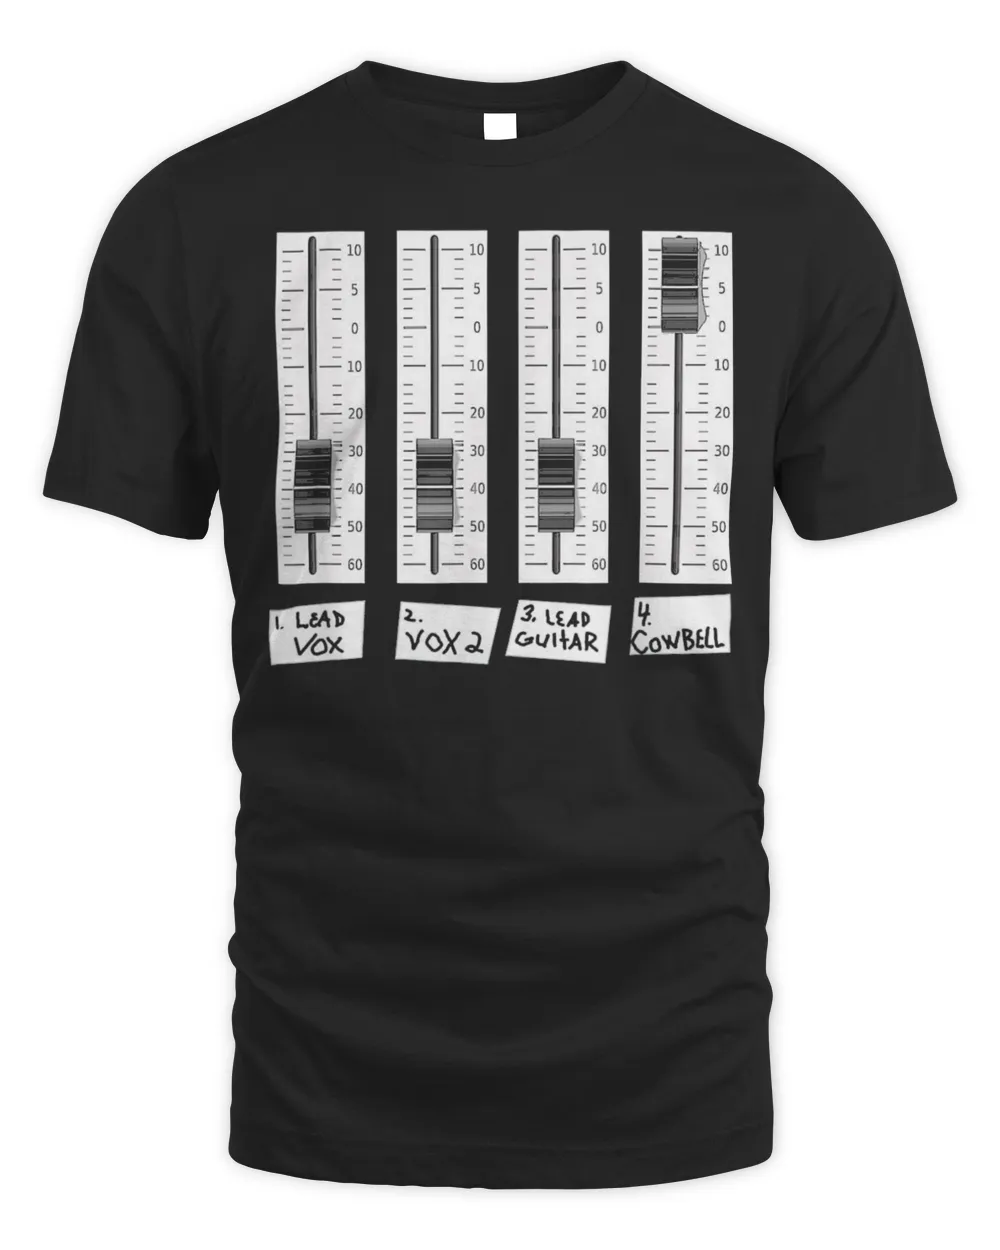 Cowbell Reference, By Yoraytees T-Shirt